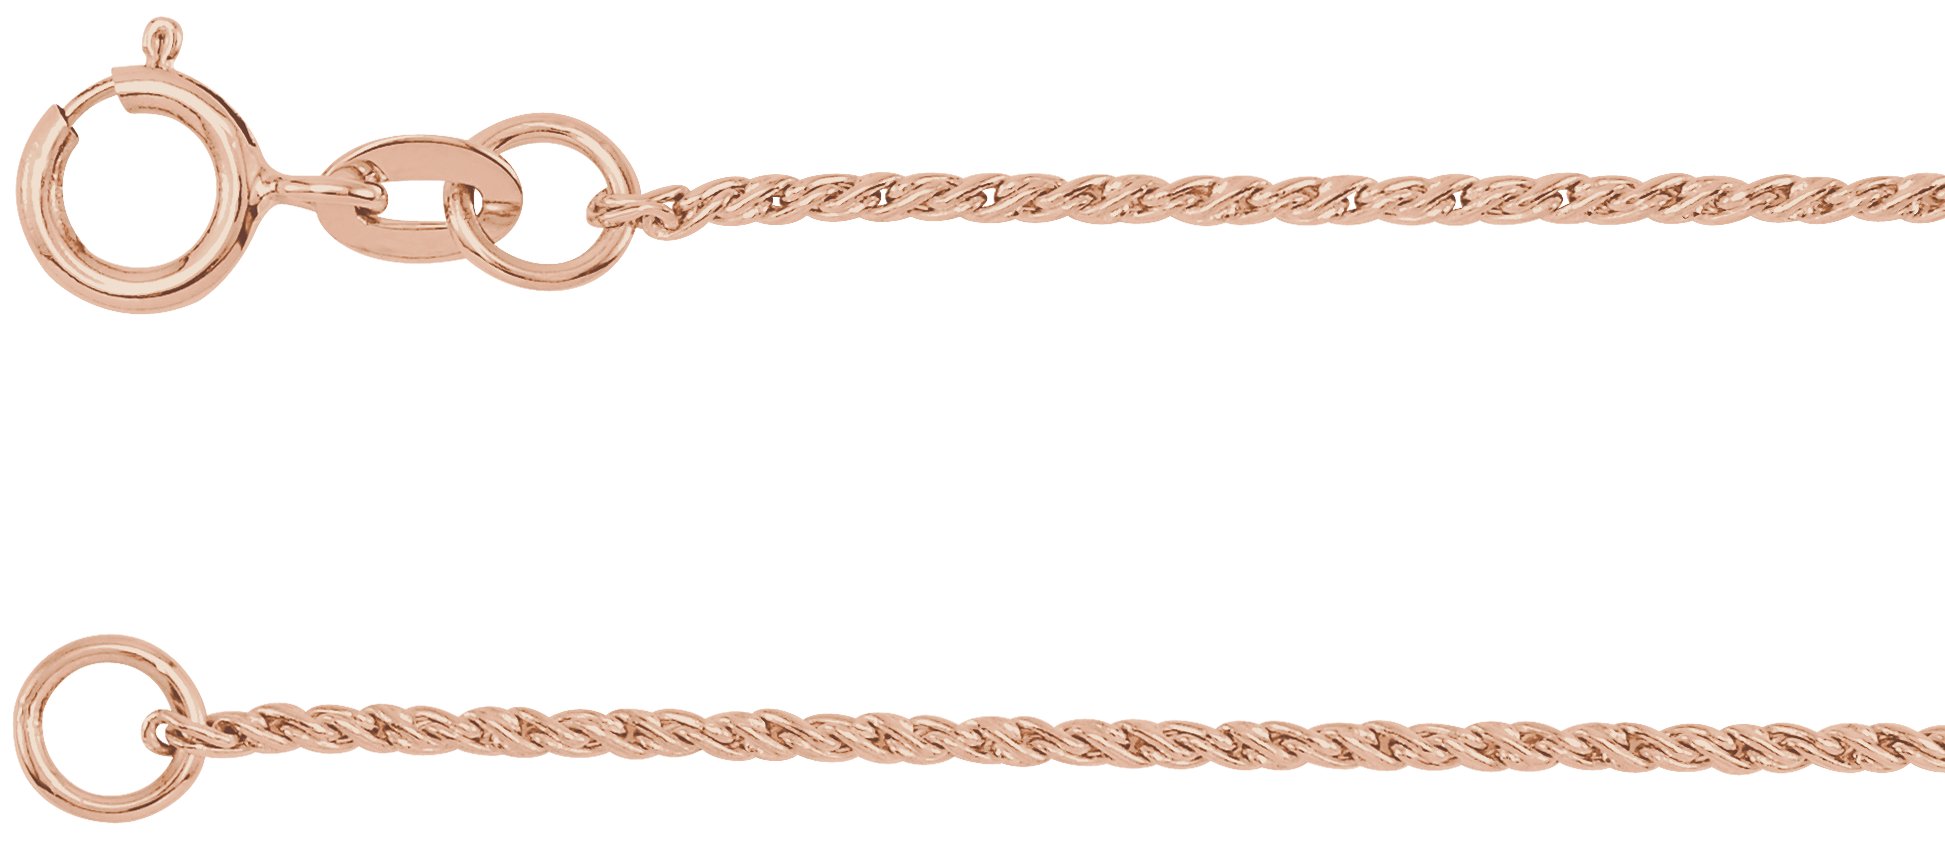 14K Rose 1 mm Twisted Wheat 20" Chain